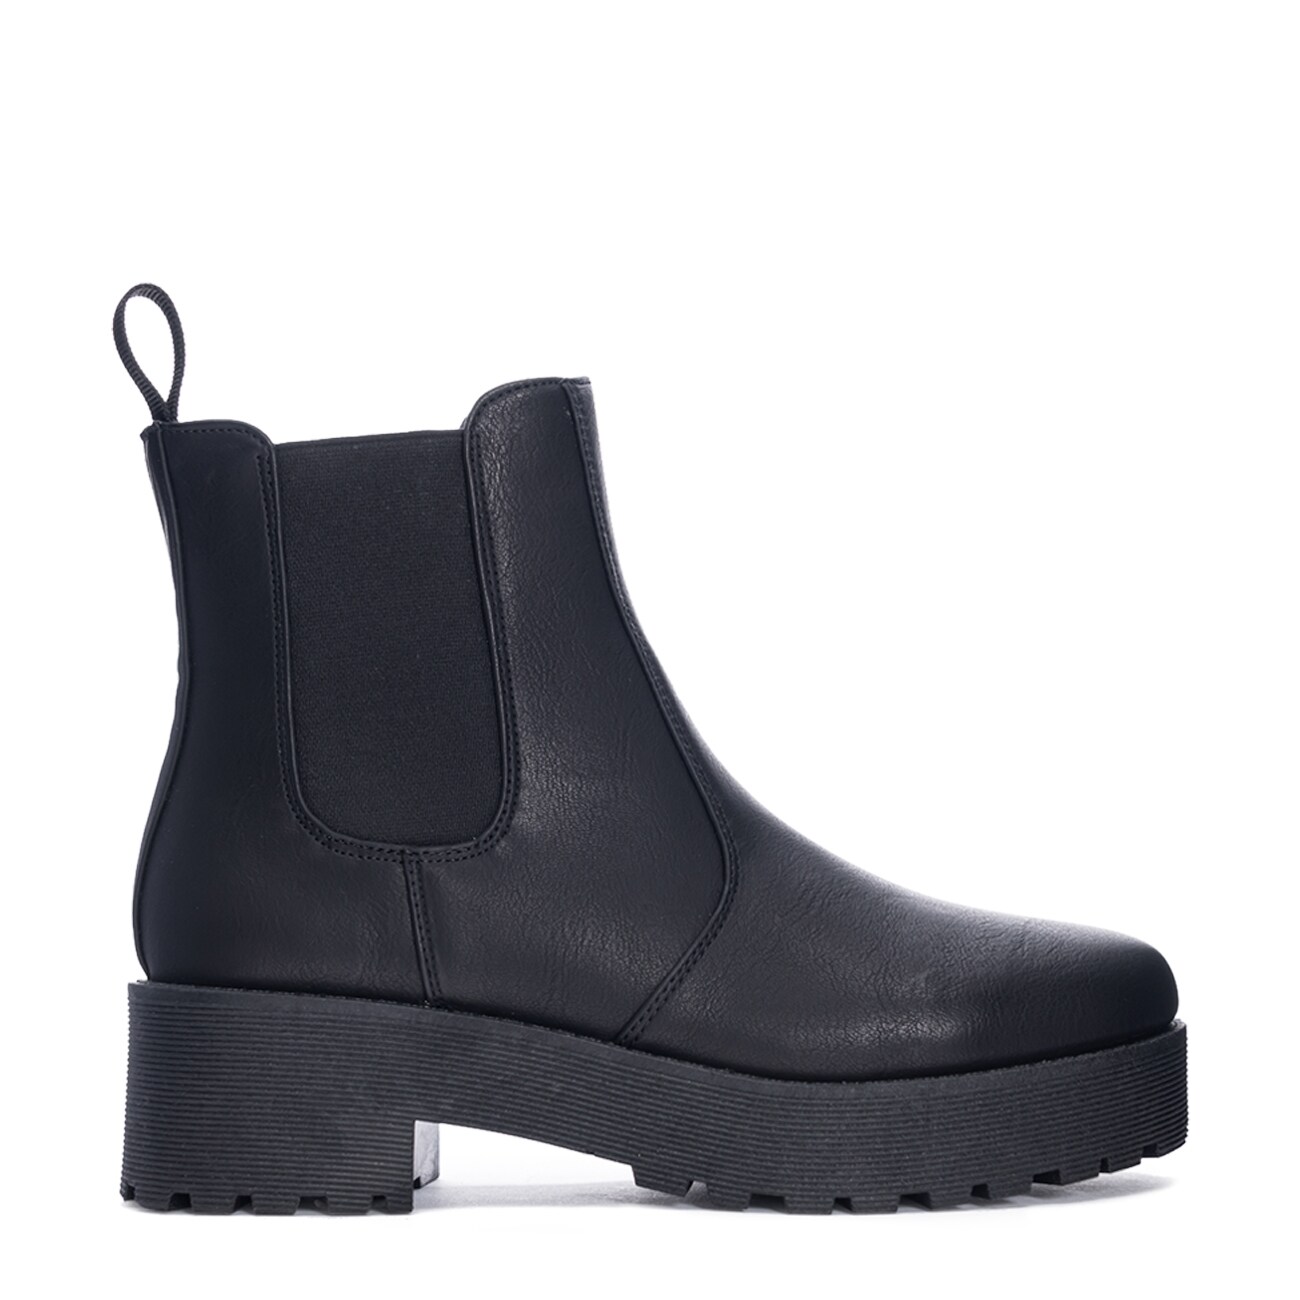 Dirty Laundry Monet Chelsea Boot | The Shoe Company